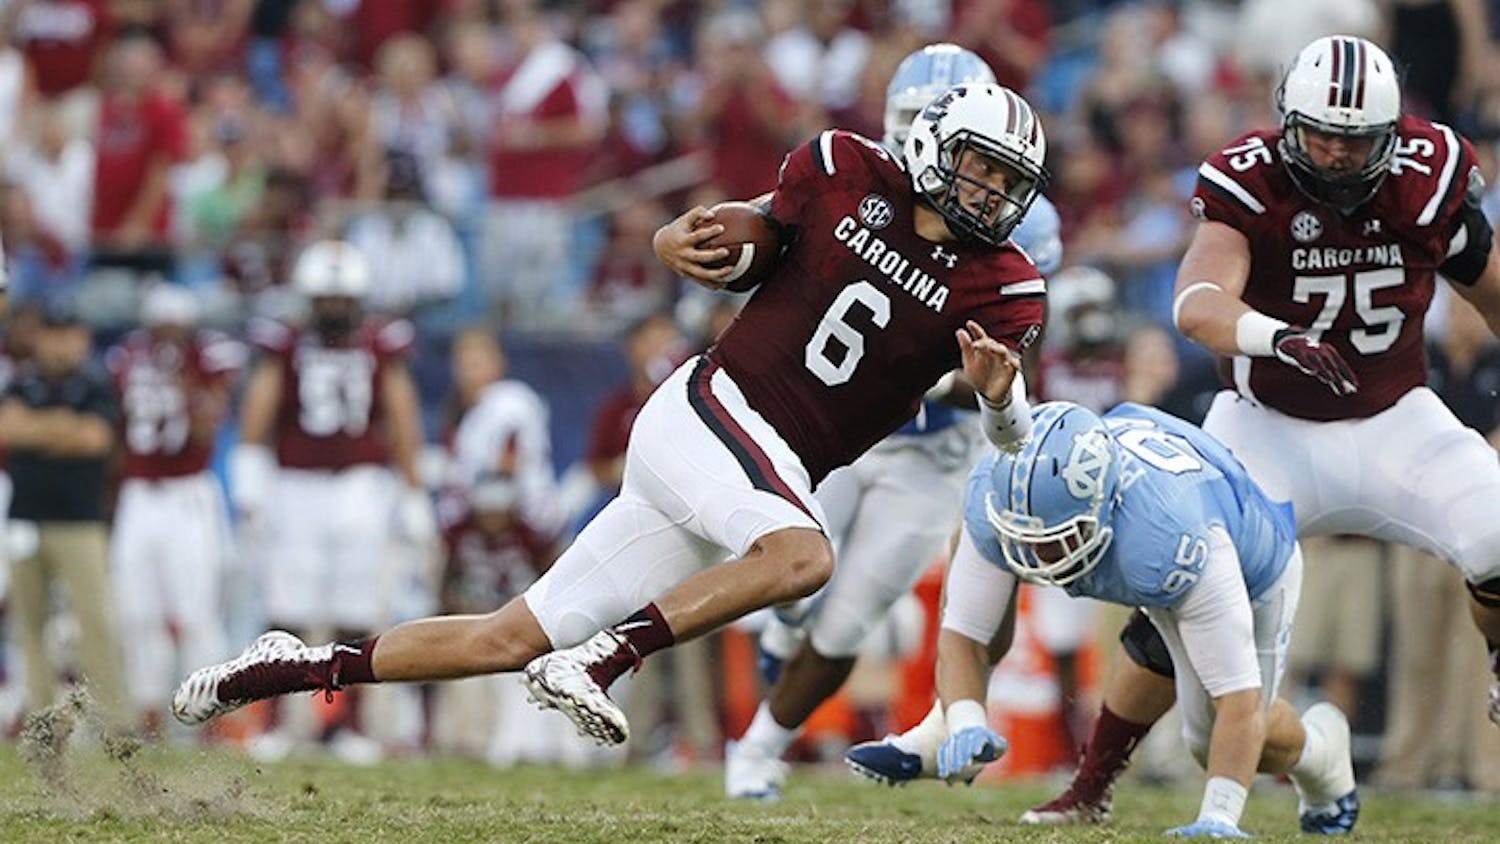 South Carolina quarterback Connor Mitch (6) runs for yardage during the first half against North Carolina in the Belk College Kickoff at Bank of America Stadium in Charlotte, N.C., on Thursday, Sept. 3, 2015. (Ethan Hyman/Raleigh News &amp; Observer/TNS)